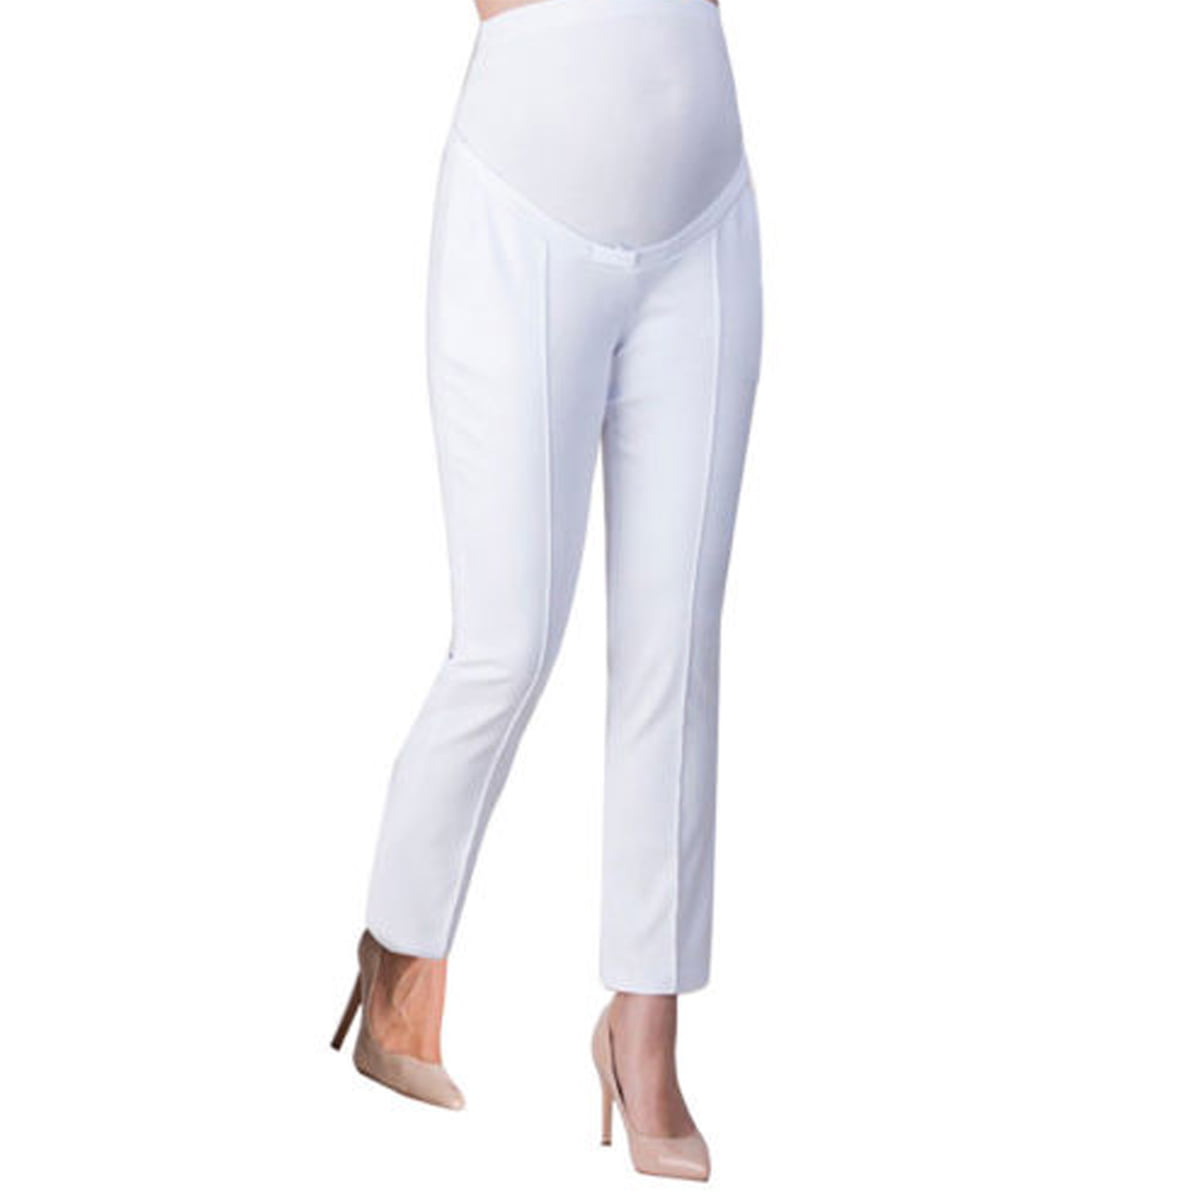 Maternity Pants Comfortable Stretch Over-Bump Women Pregnancy Casual Capris for Work 